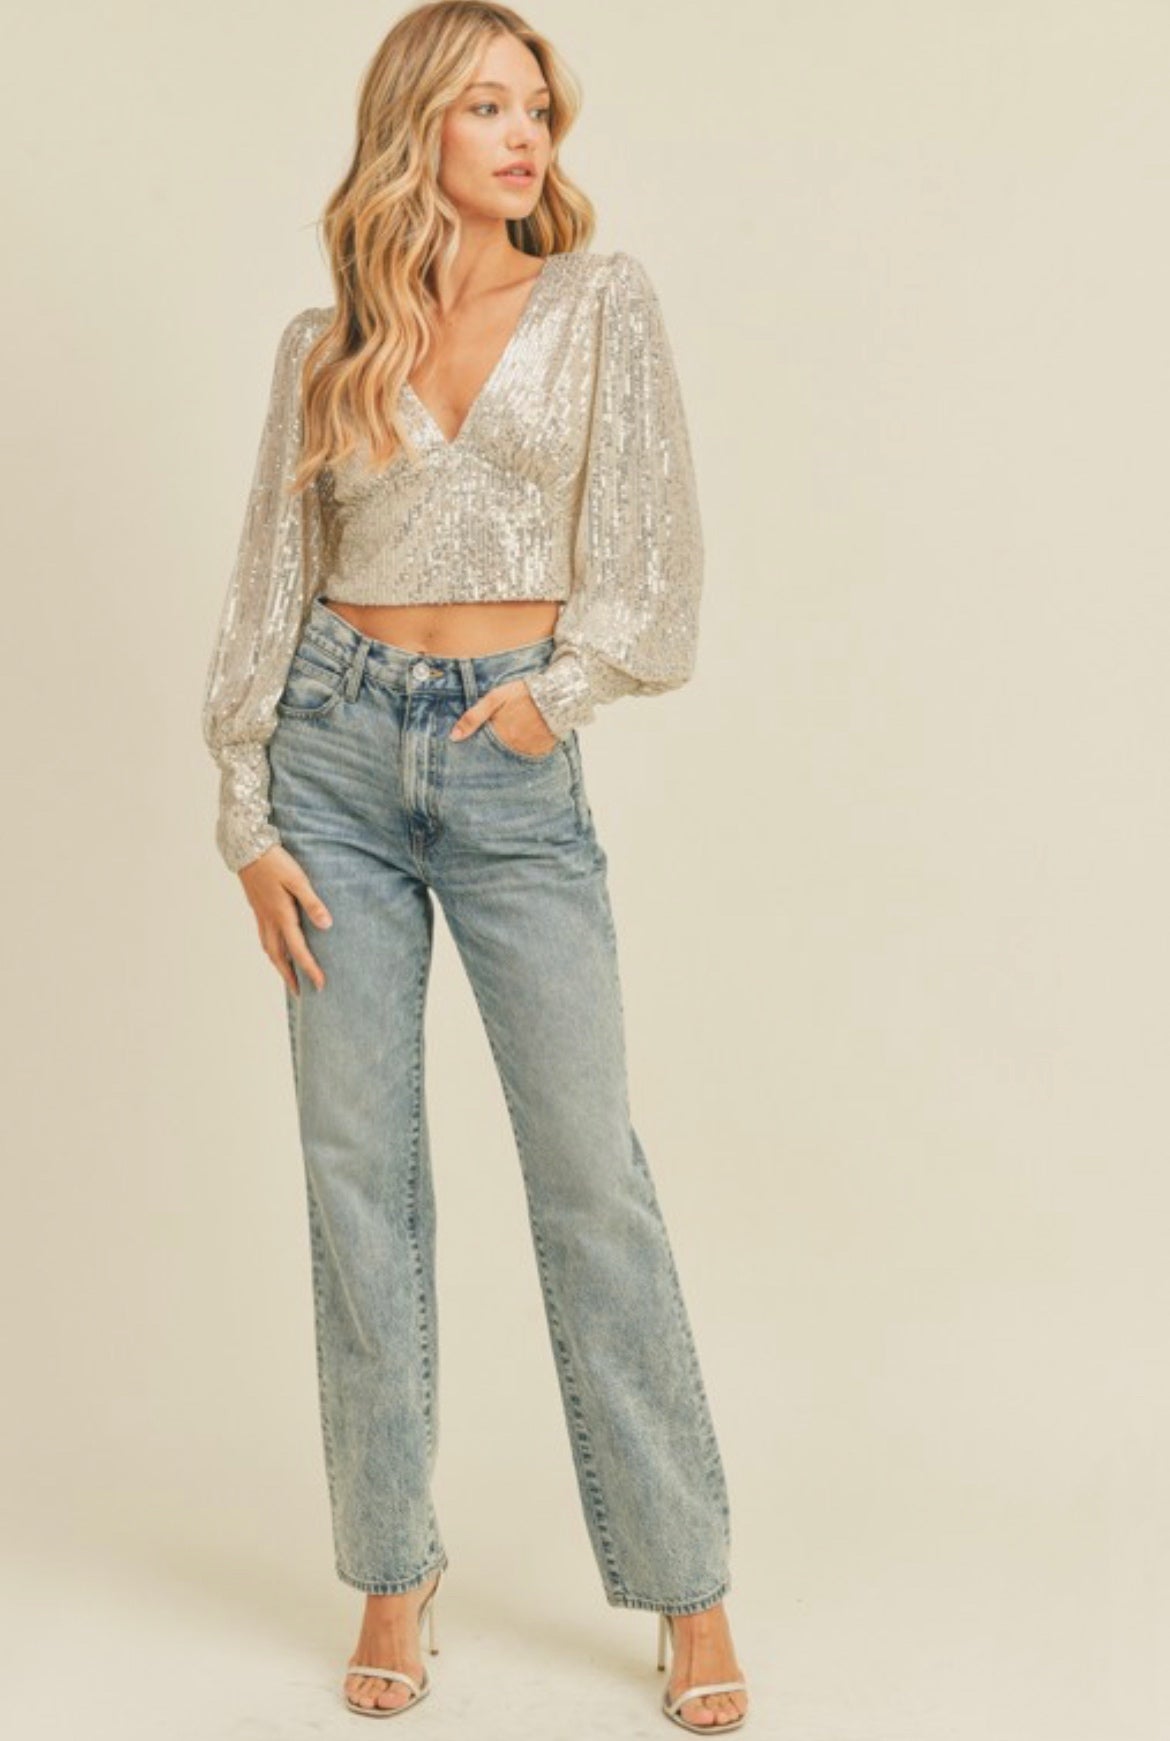 Long Sleeve Cropped Sequin V Neck Top in Oyster/Cream Medium Top